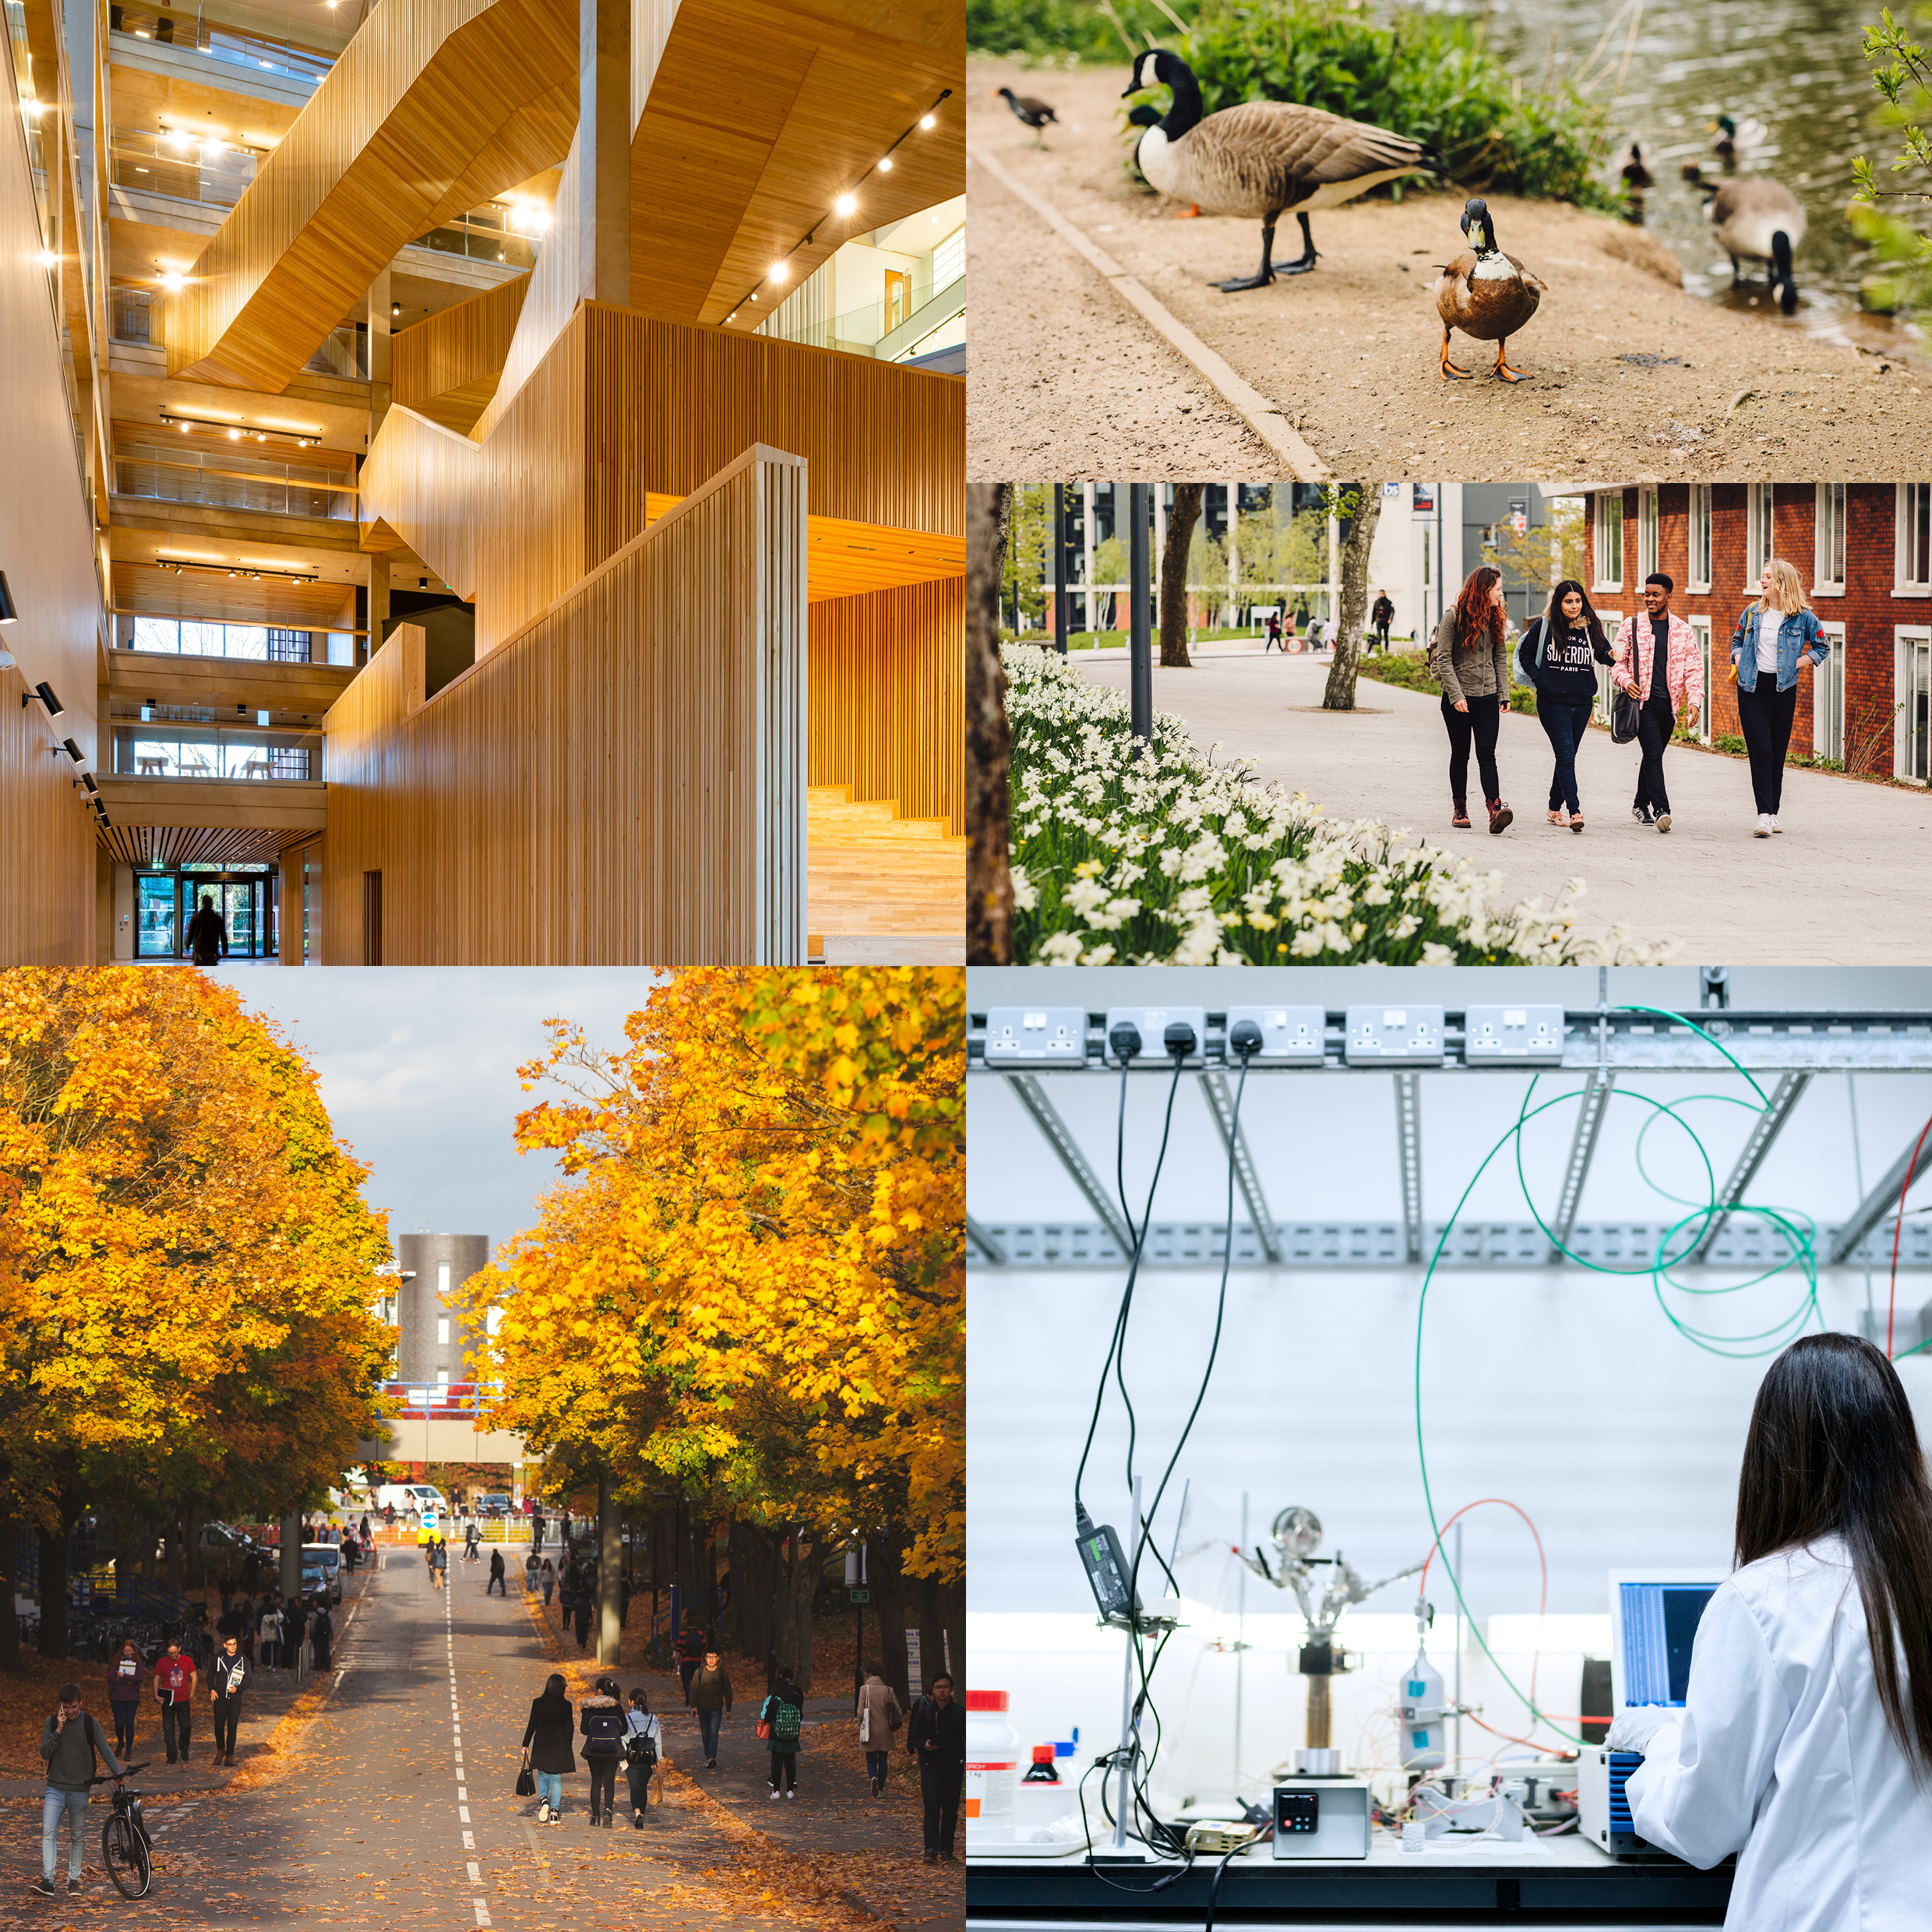 Five examples of environment photography showcasing our campus